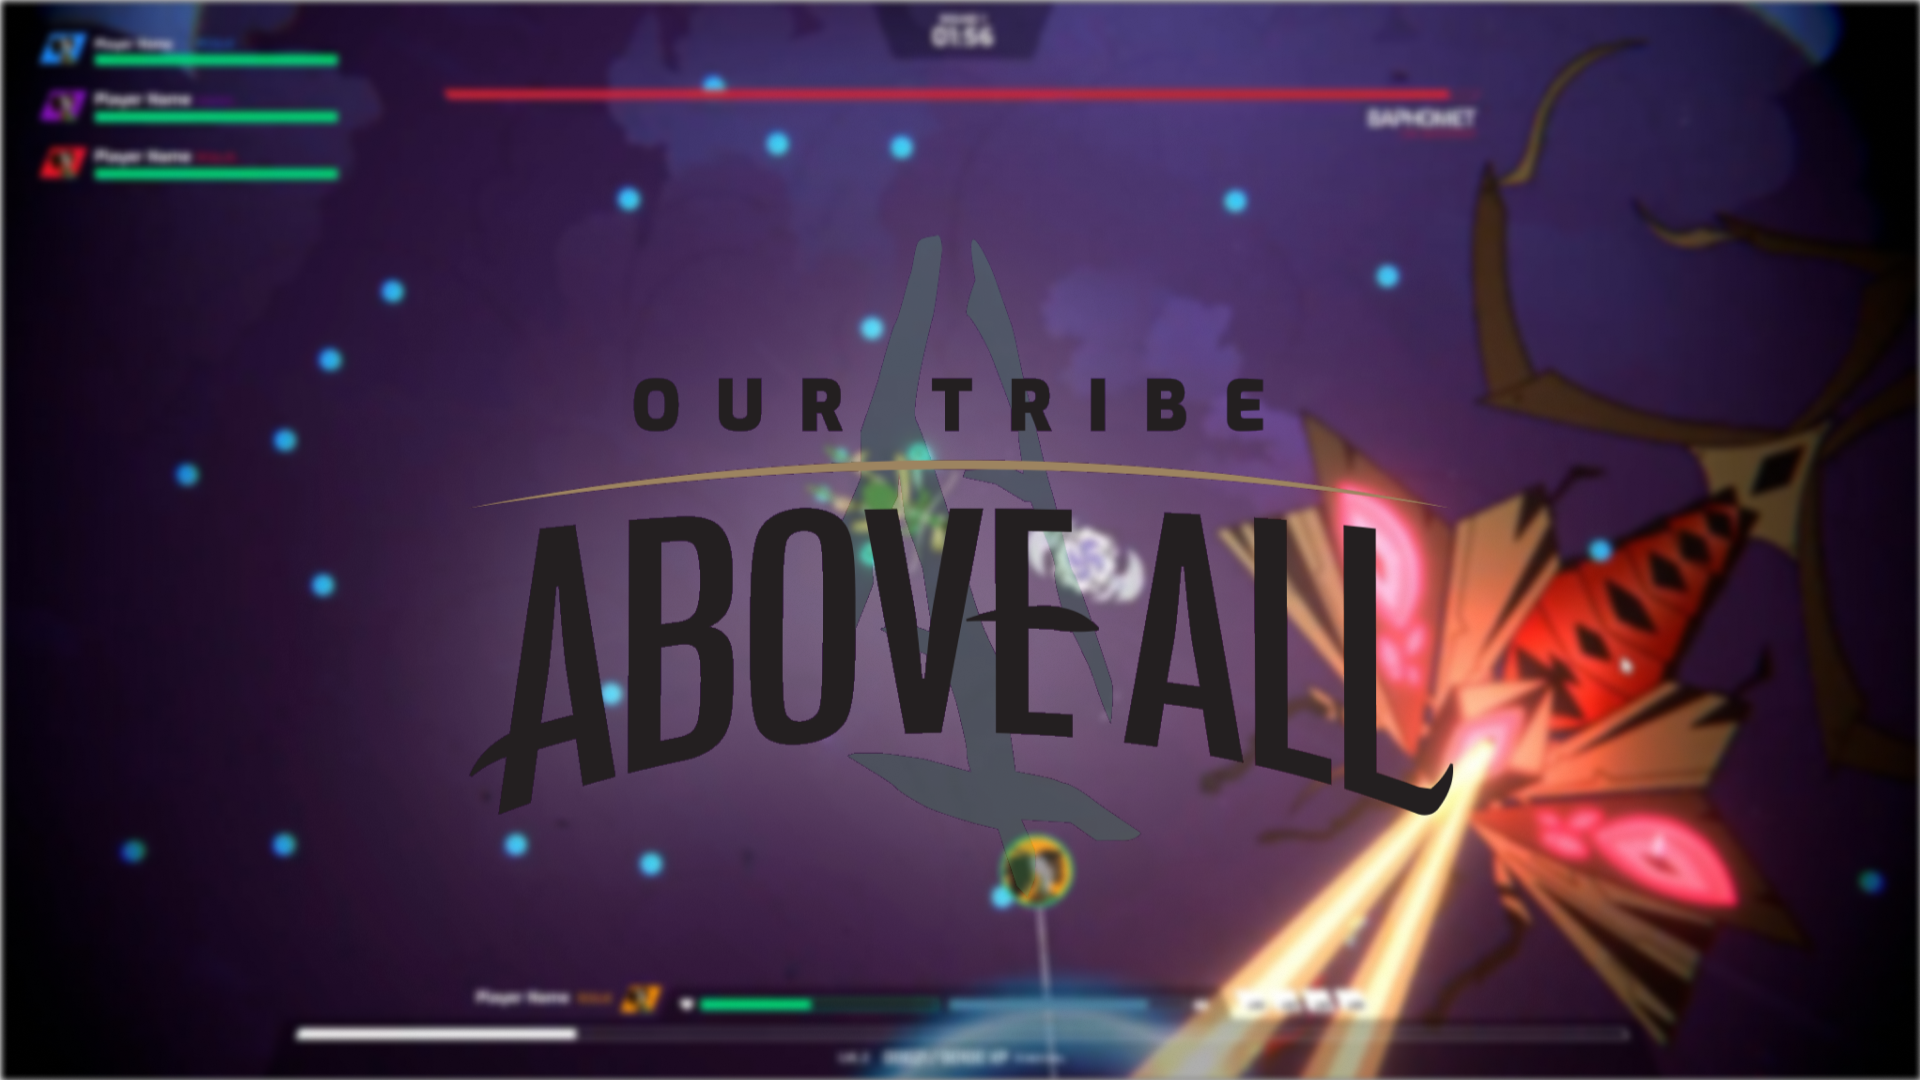 Our Tribe Above All capsule art